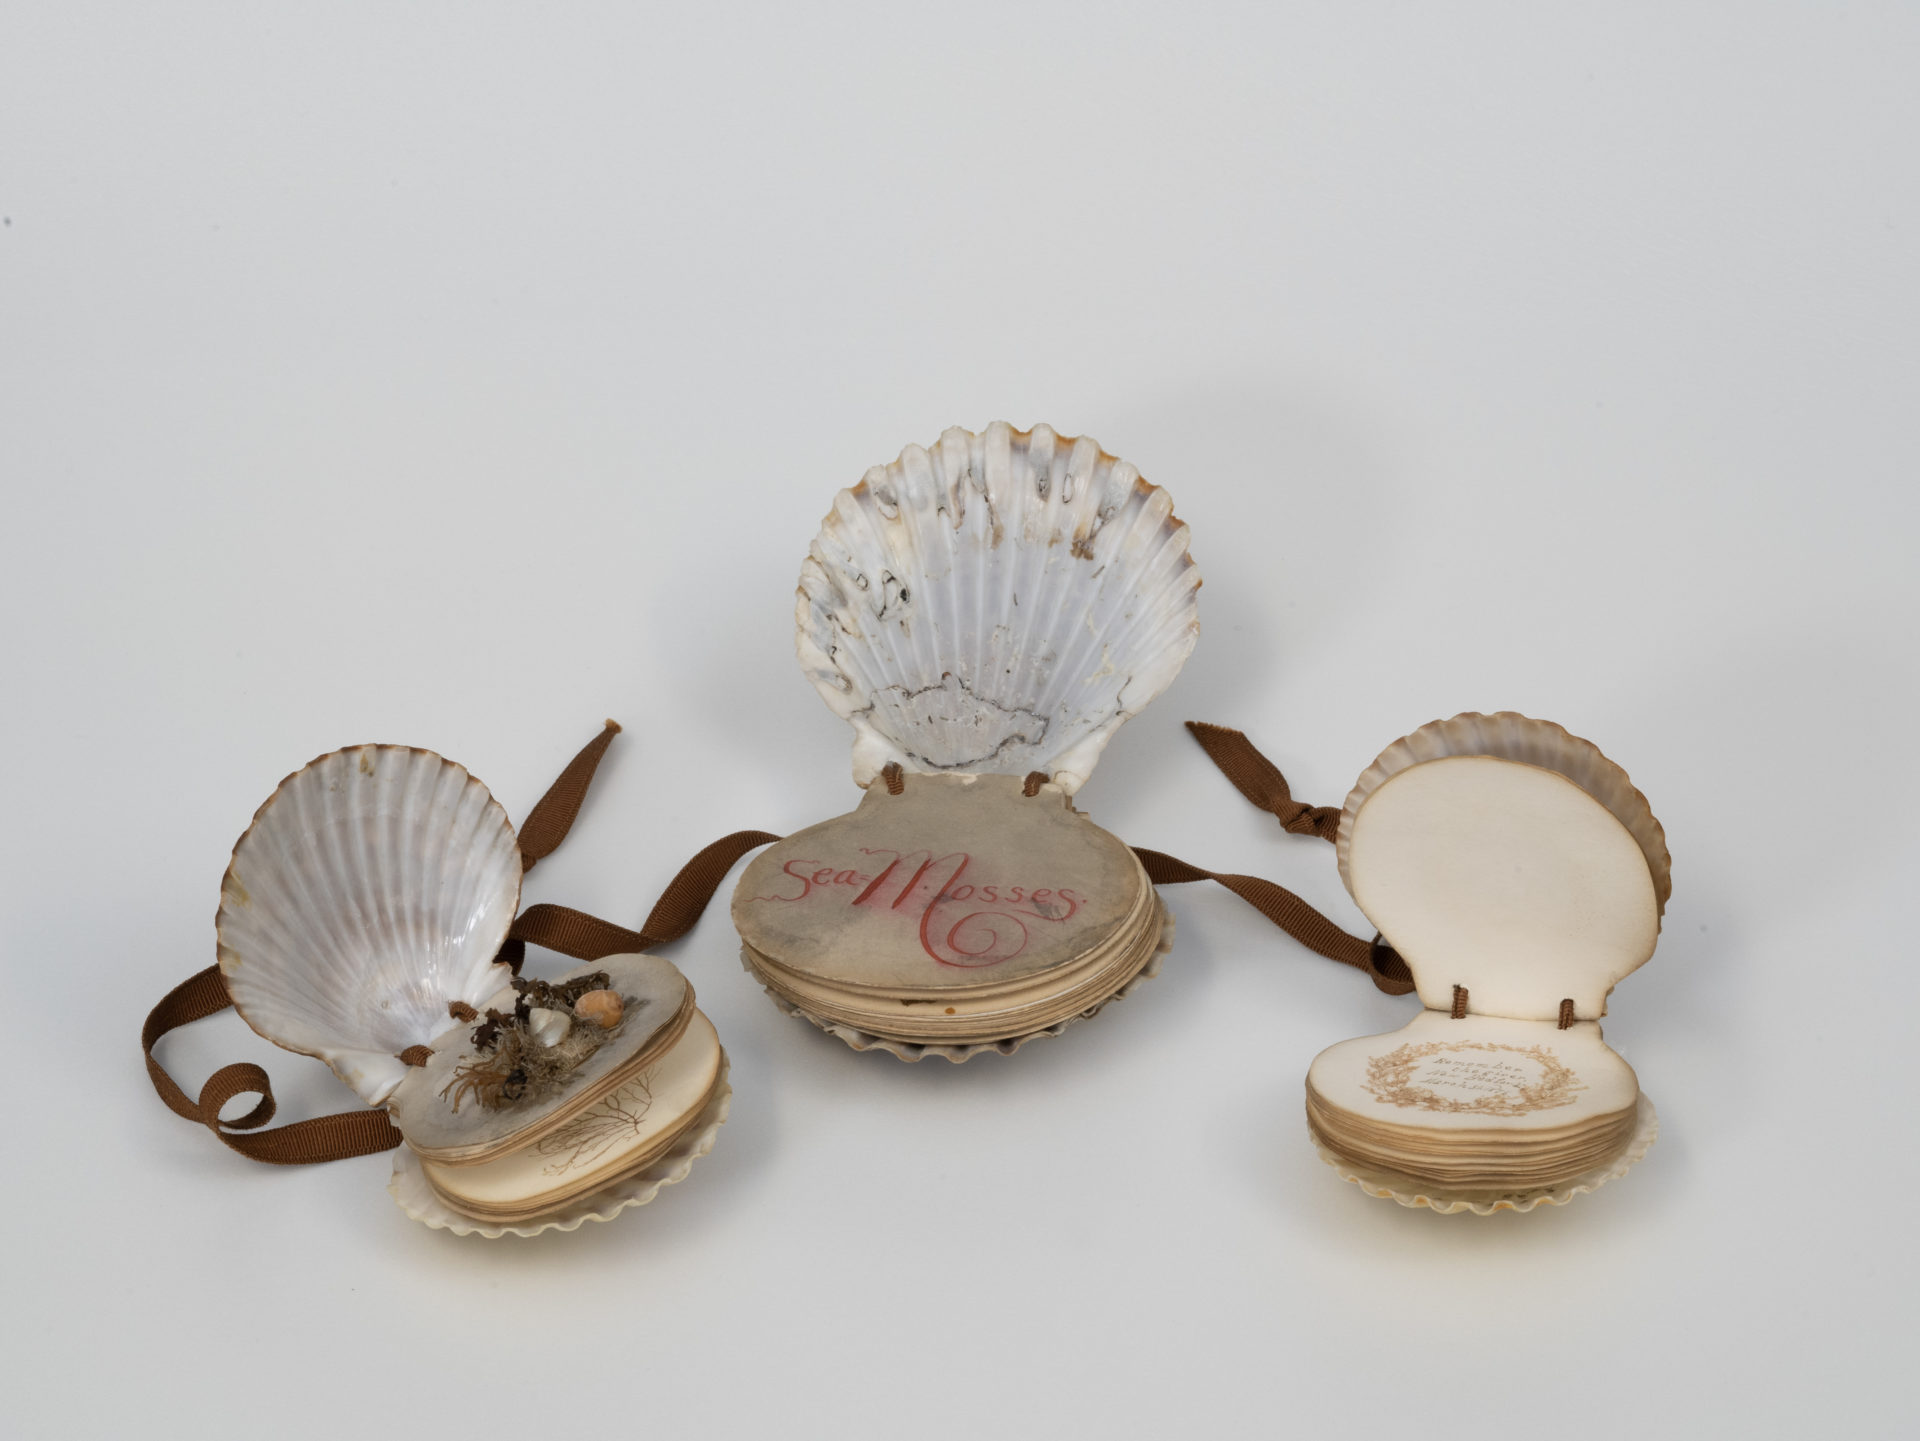 Three open clams with art inside. The one in the middle has writing saying "Sea Mosses"